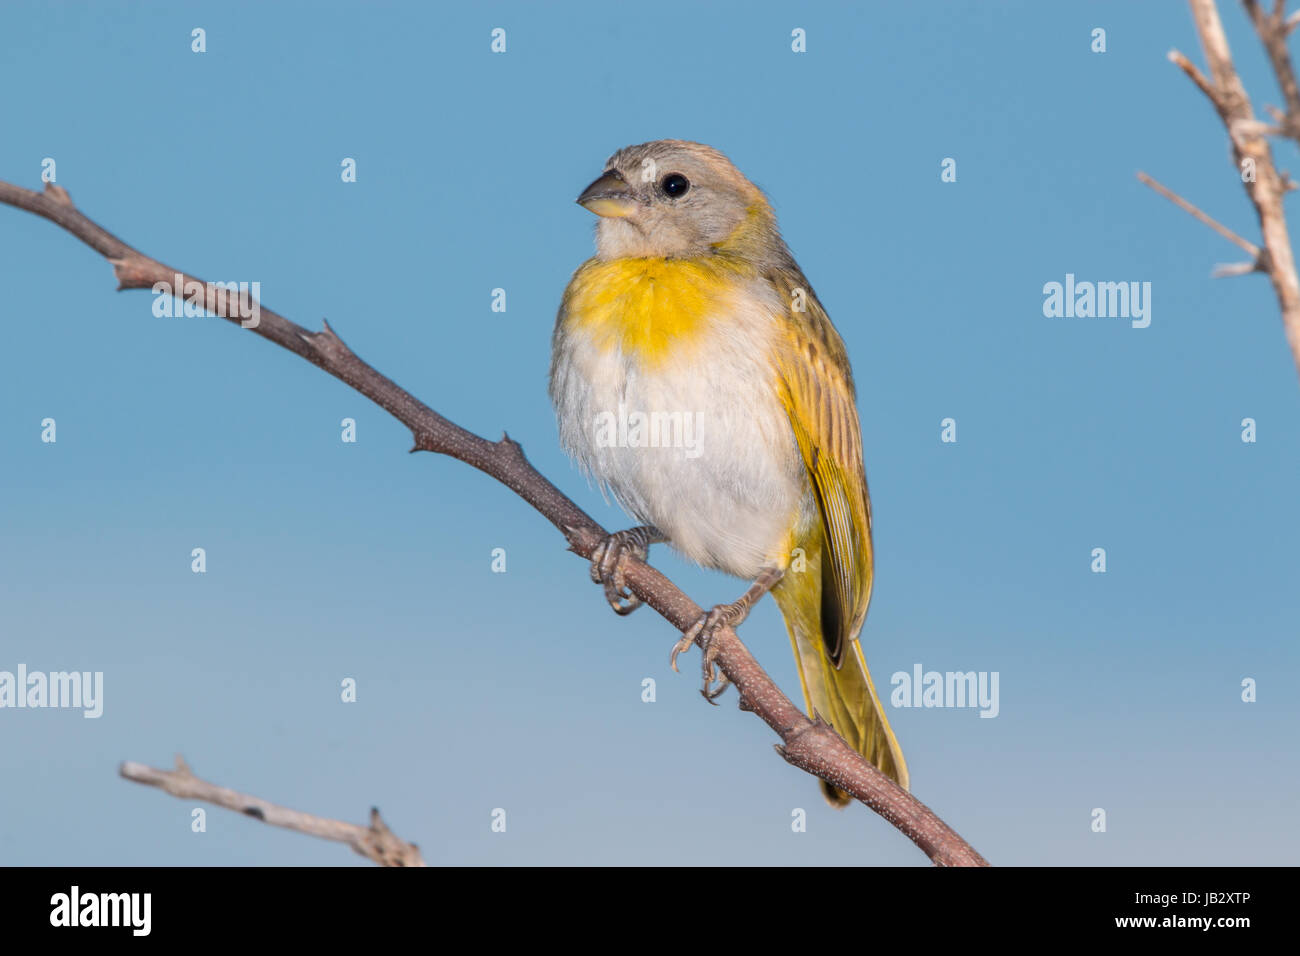 Juvenile of the saffron finch (Sicalis flaveola) in, Ibagué, Colombia Stock Photo